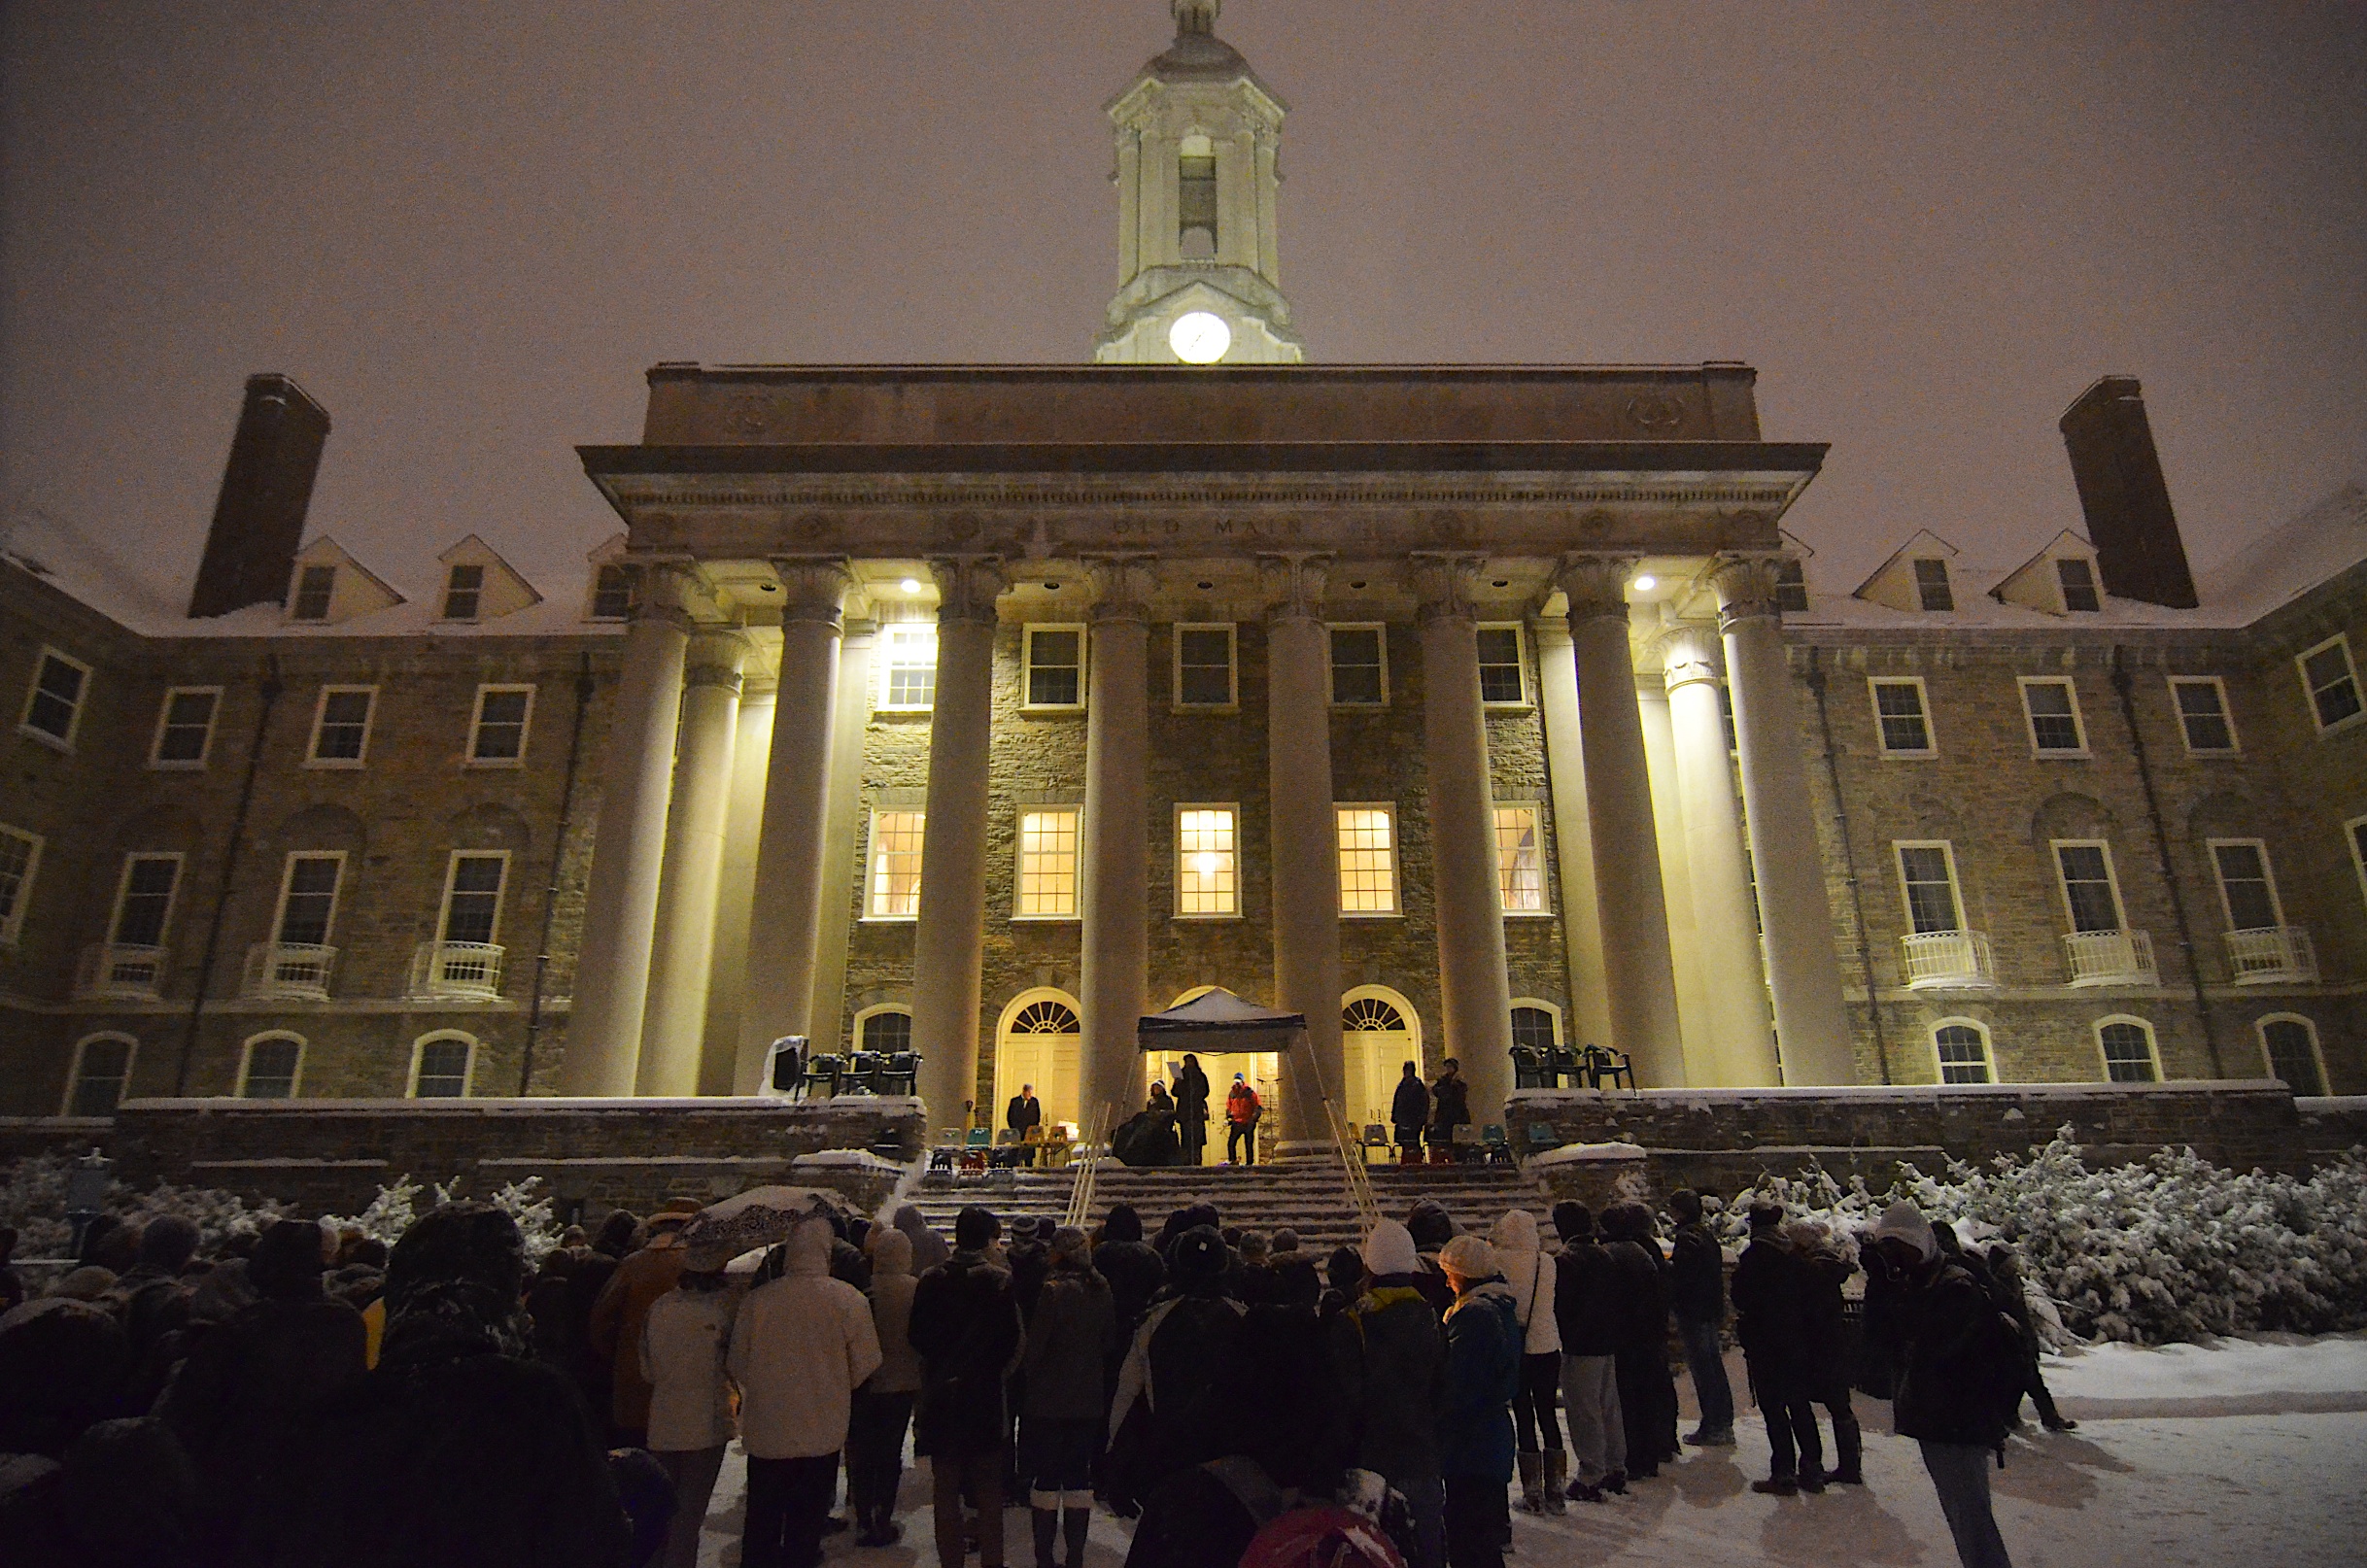 Vigil for the Sandy Hook victims on the steps of Old Main, Penn State.